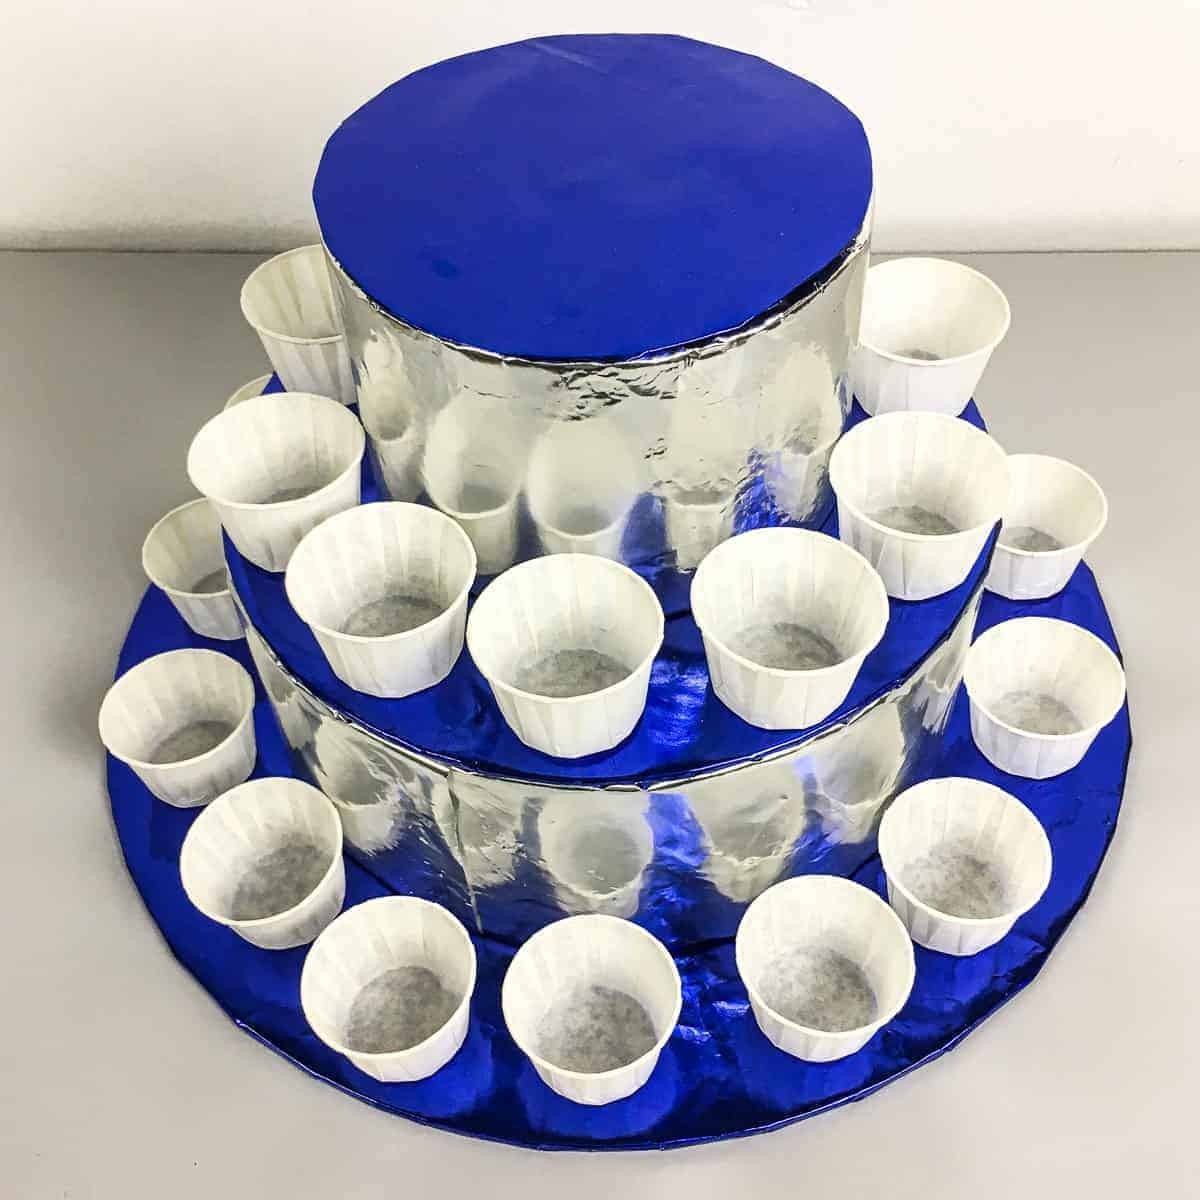 DIY cupcake stand in blue and silver